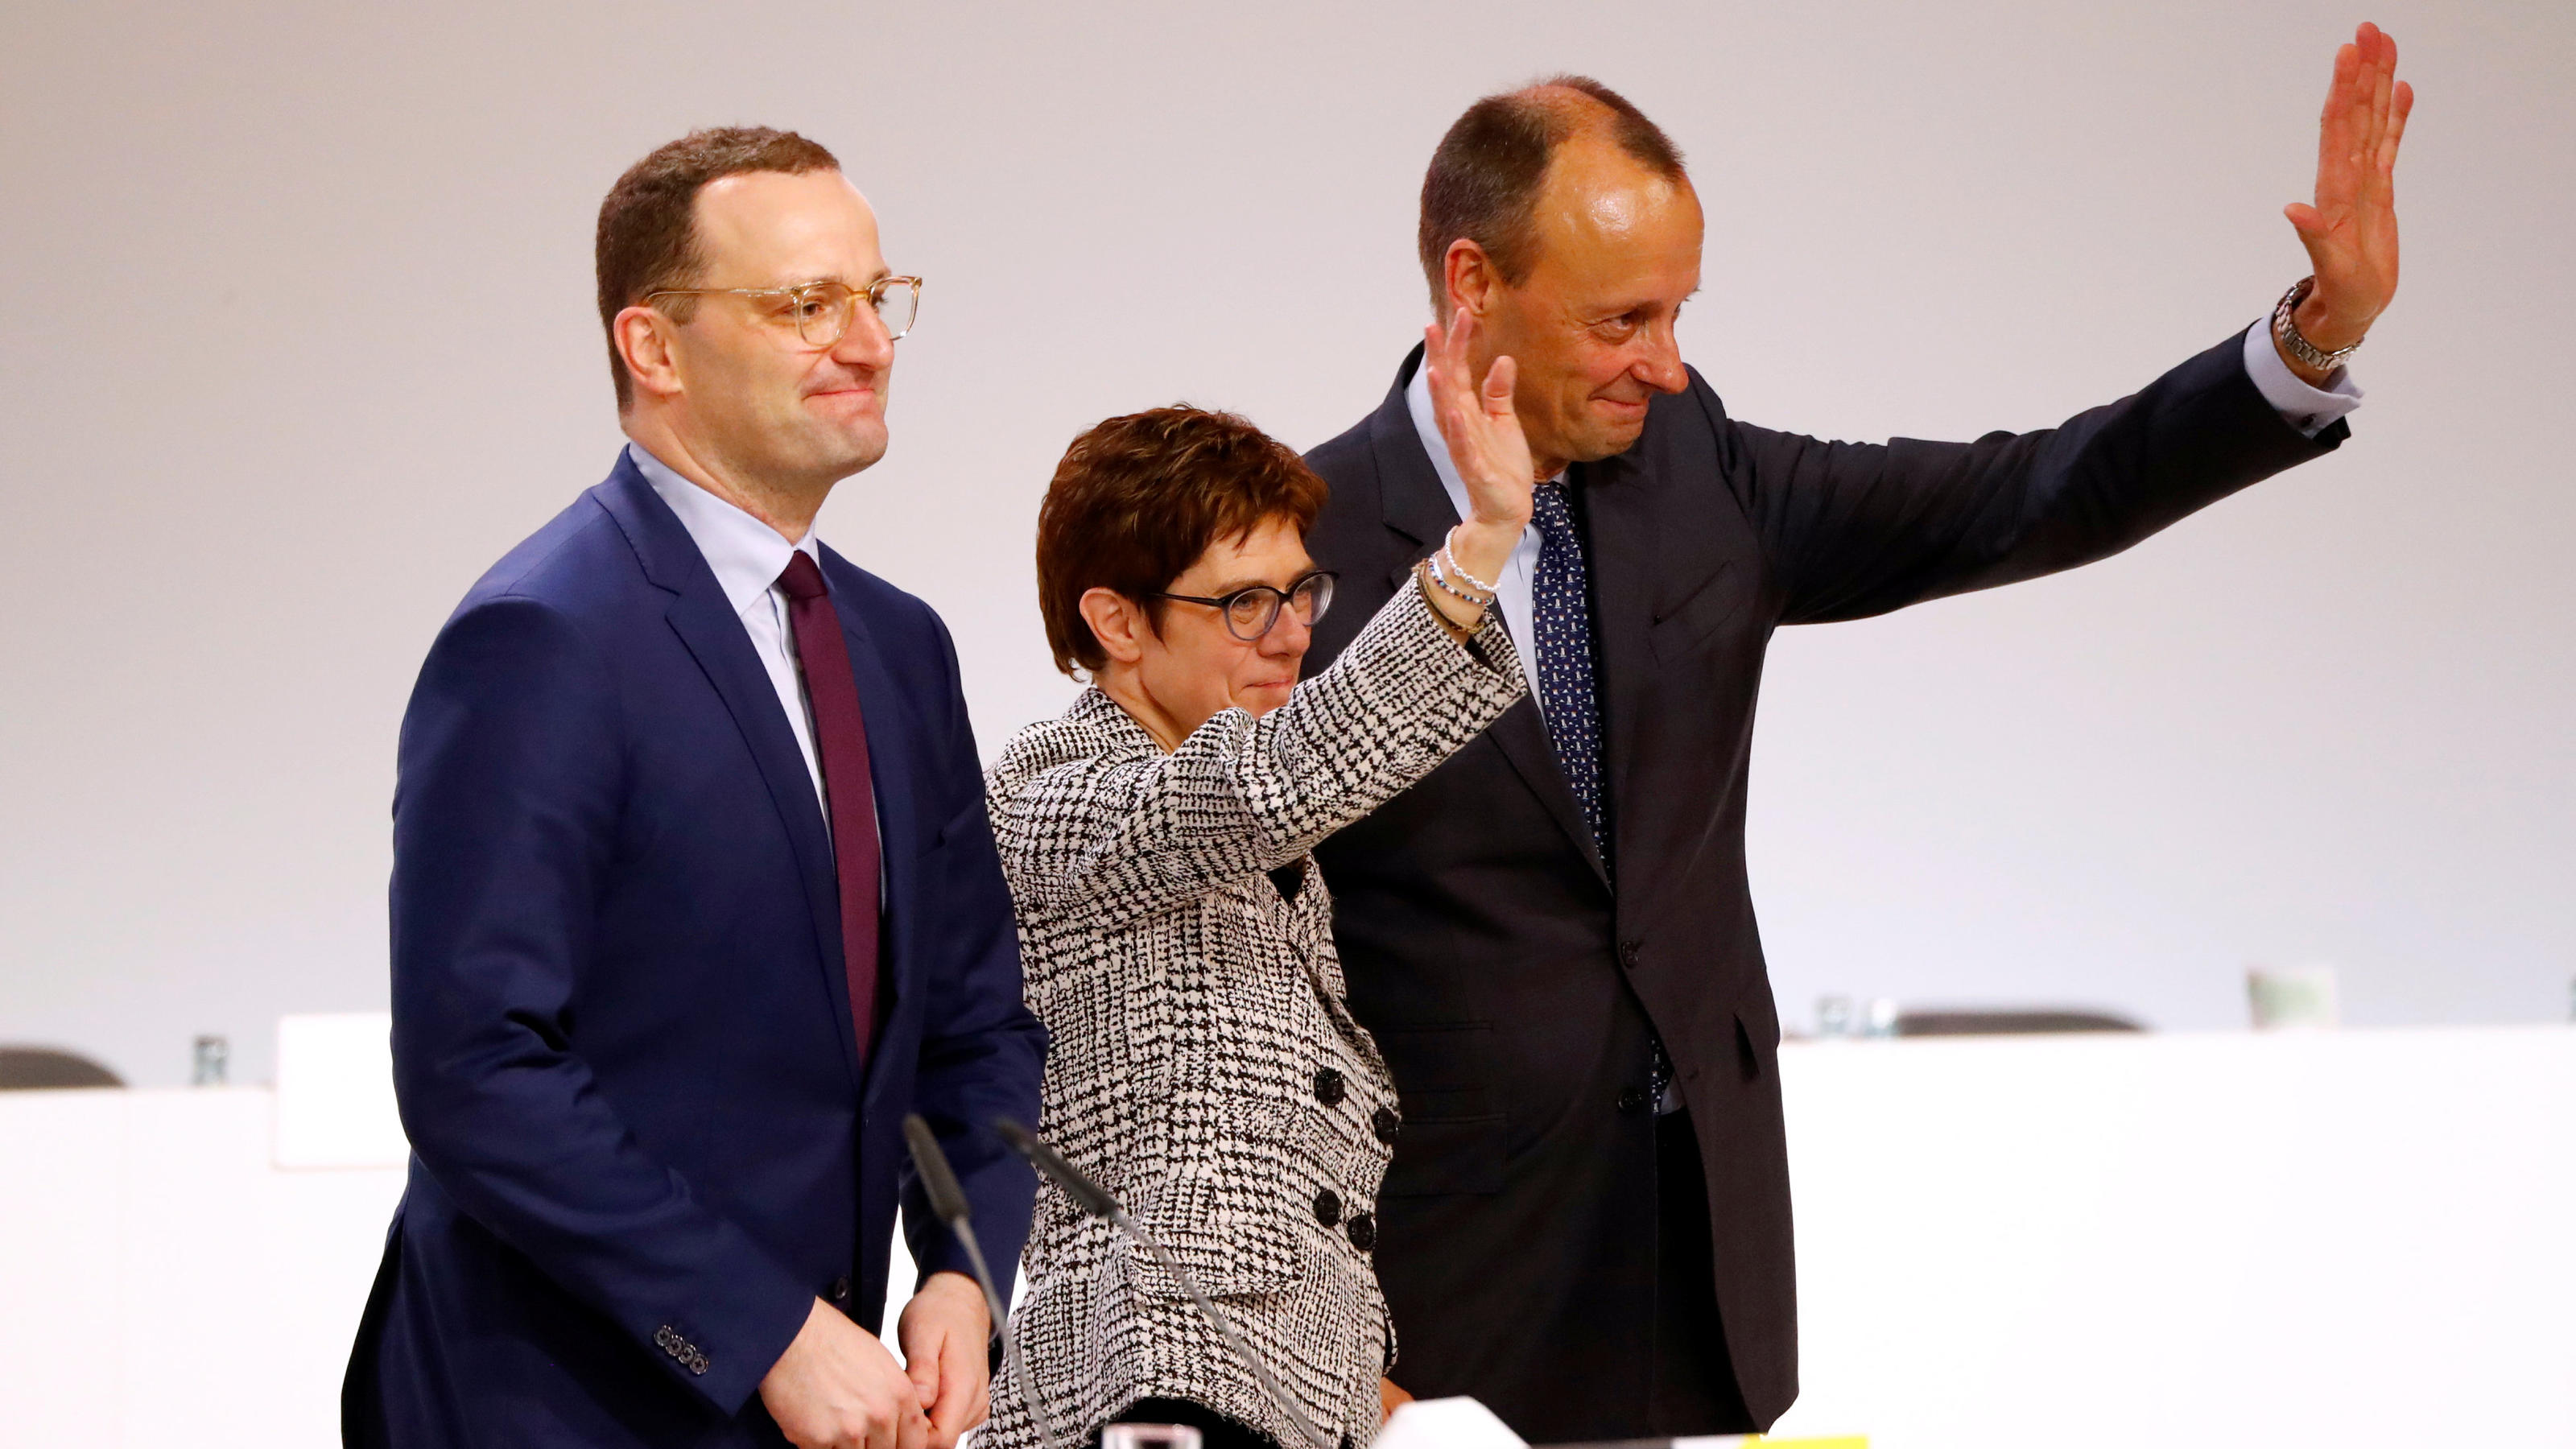 Annegret Kramp-Karrenbauer waves with fellow candidates Jens Spahn and Friedrich Merz after being elected as the party leader during the Christian Democratic Union (CDU) party congress in Hamburg, Germany, December 7, 2018. REUTERS/Fabrizio Bensch